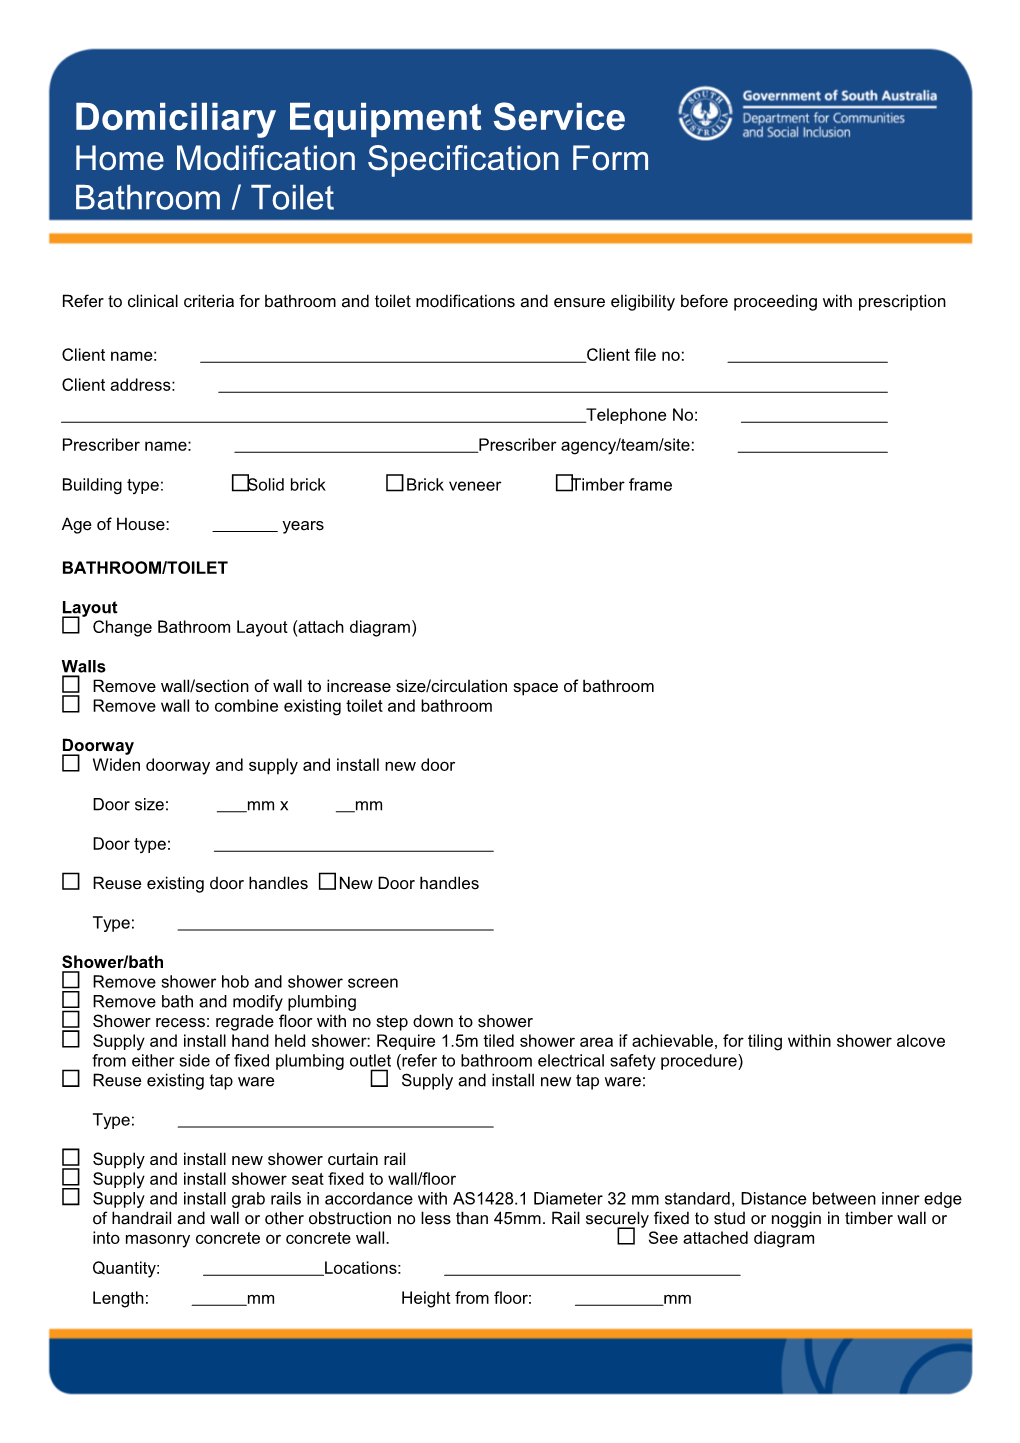 Home Modification Specification Form - Bathroom Toilet